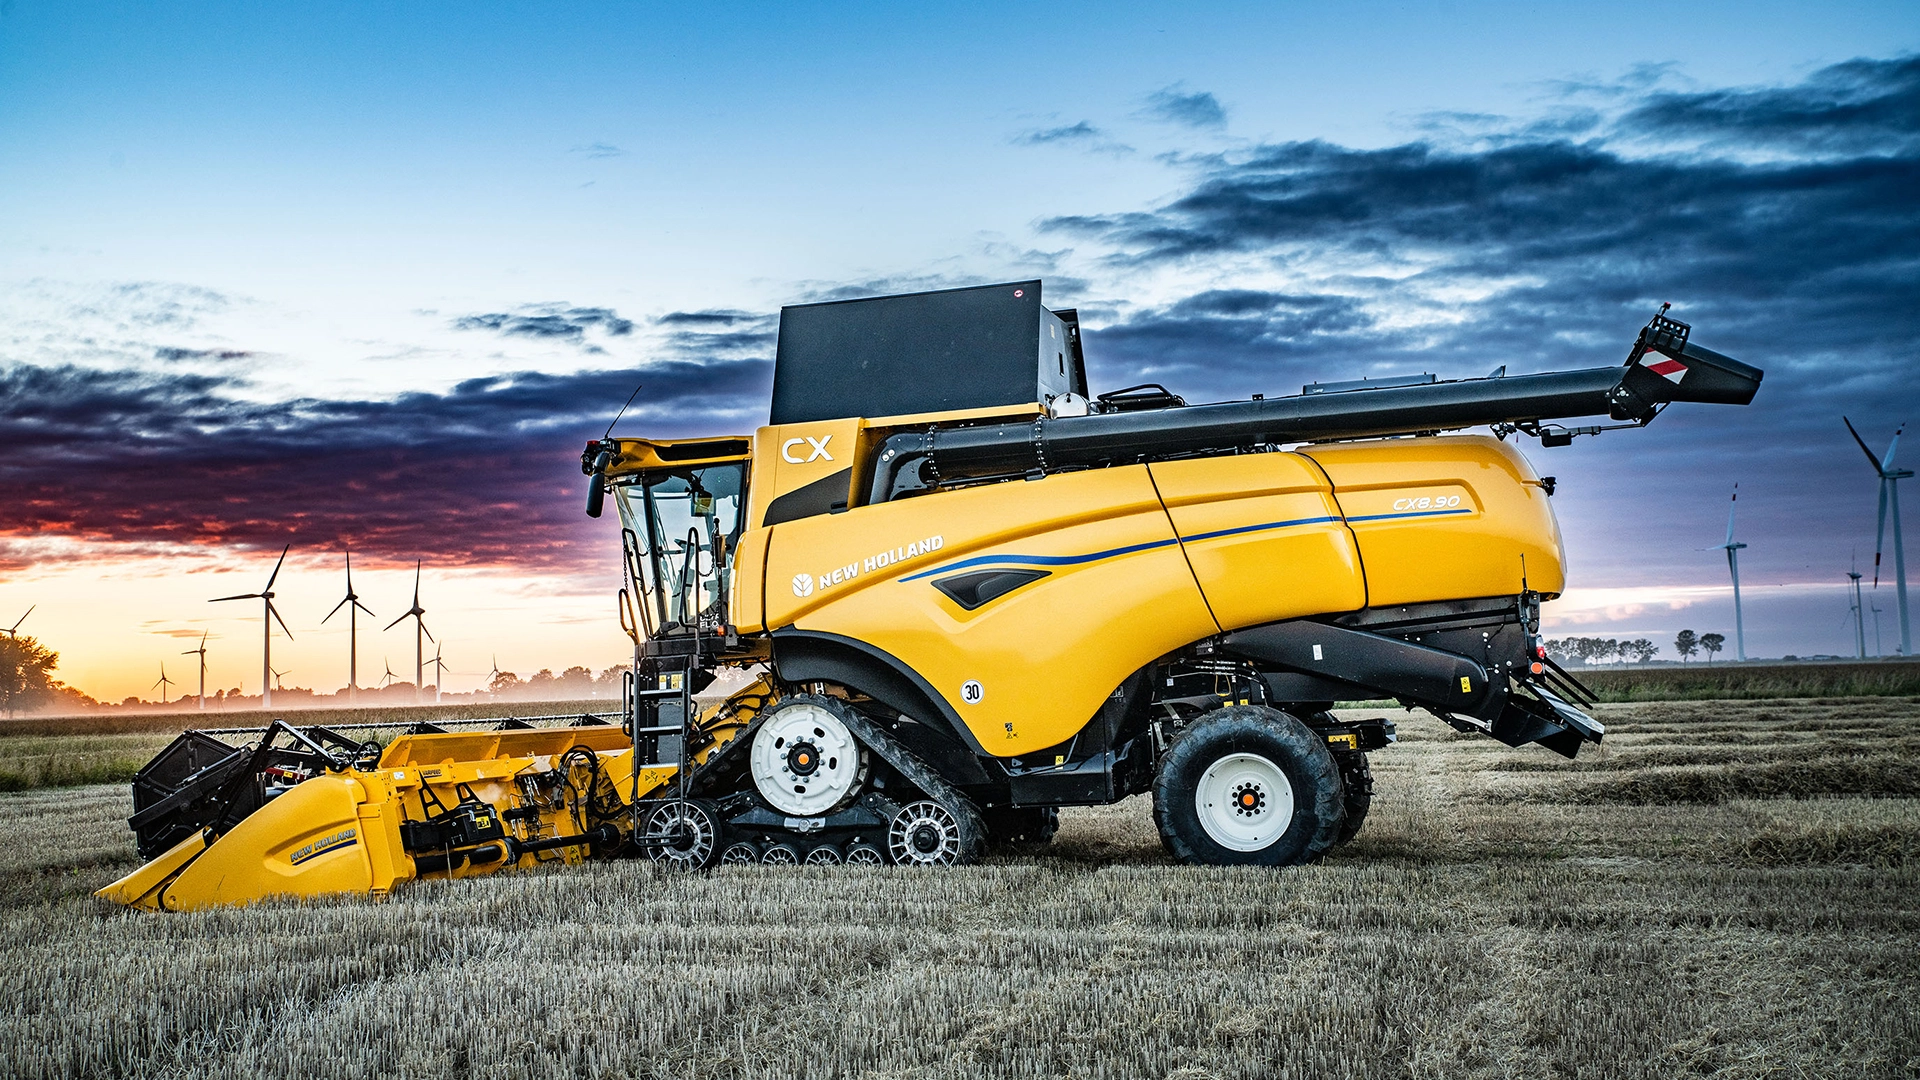 New Holland CX7 & CX8 combine harvester, specifically the CX8.90 model, stationed in a field during sunset. 